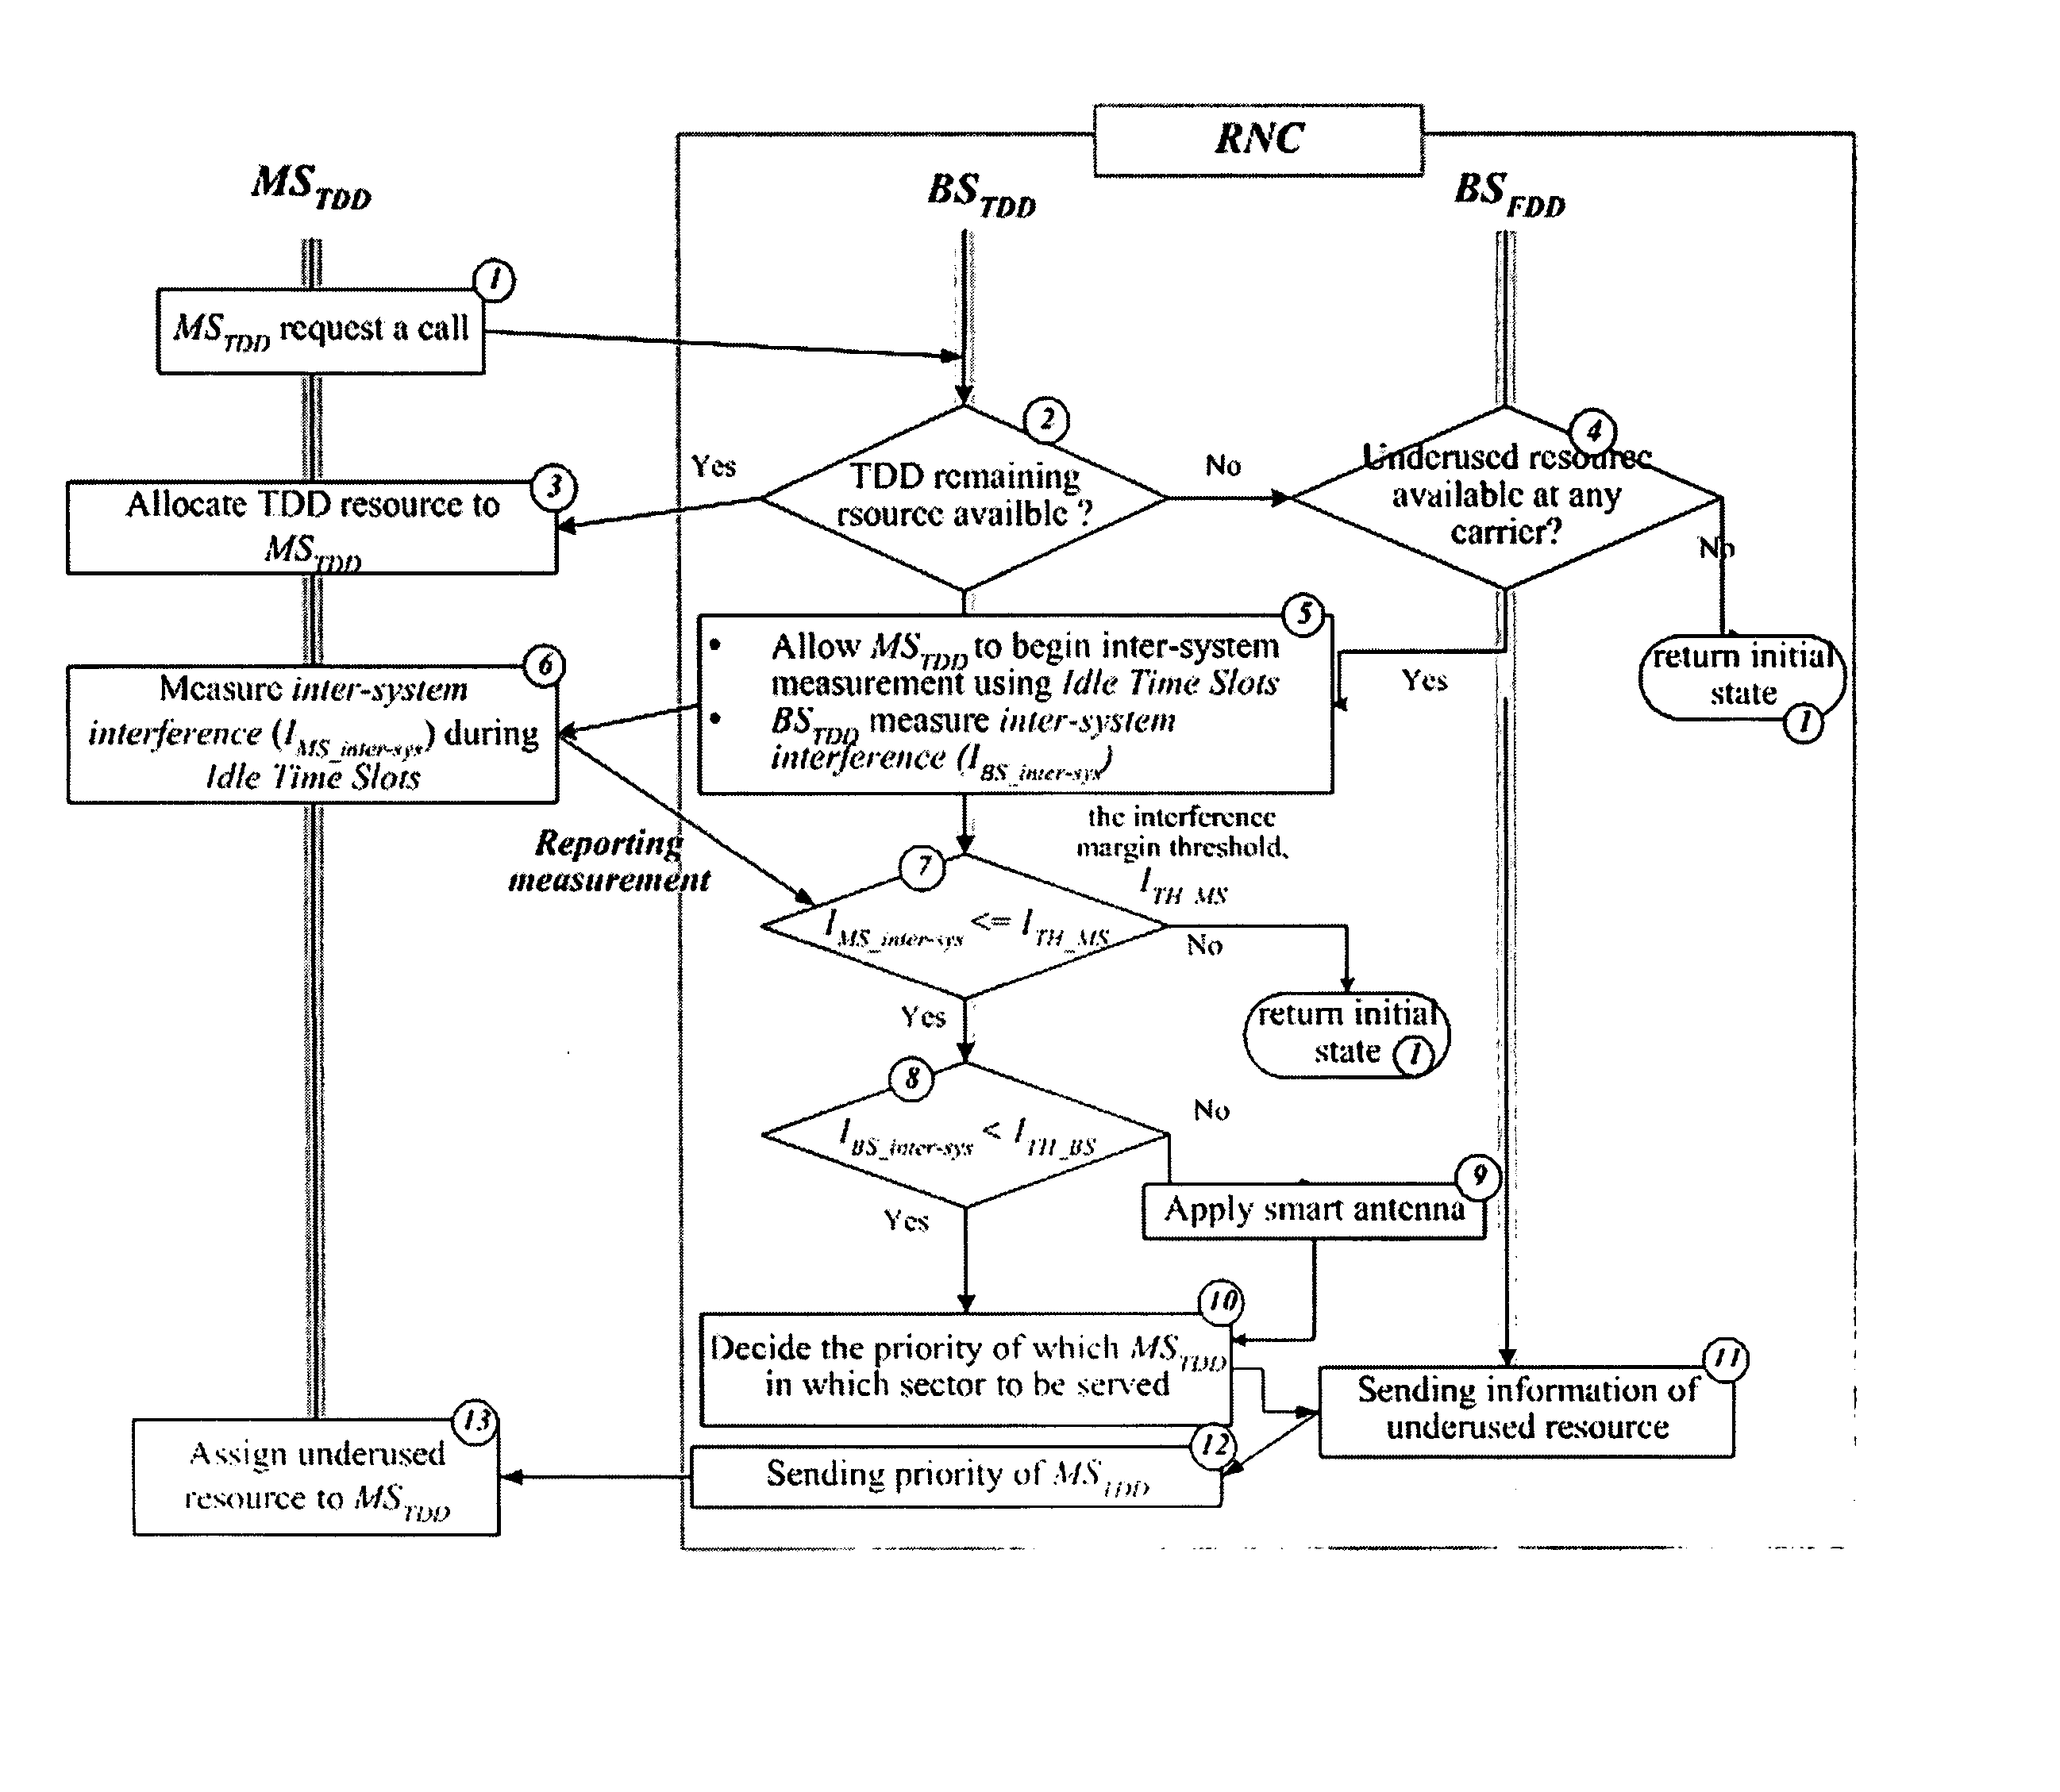 Method of operating a TDD/virtual FDD hierarchical cellular telecommunication system